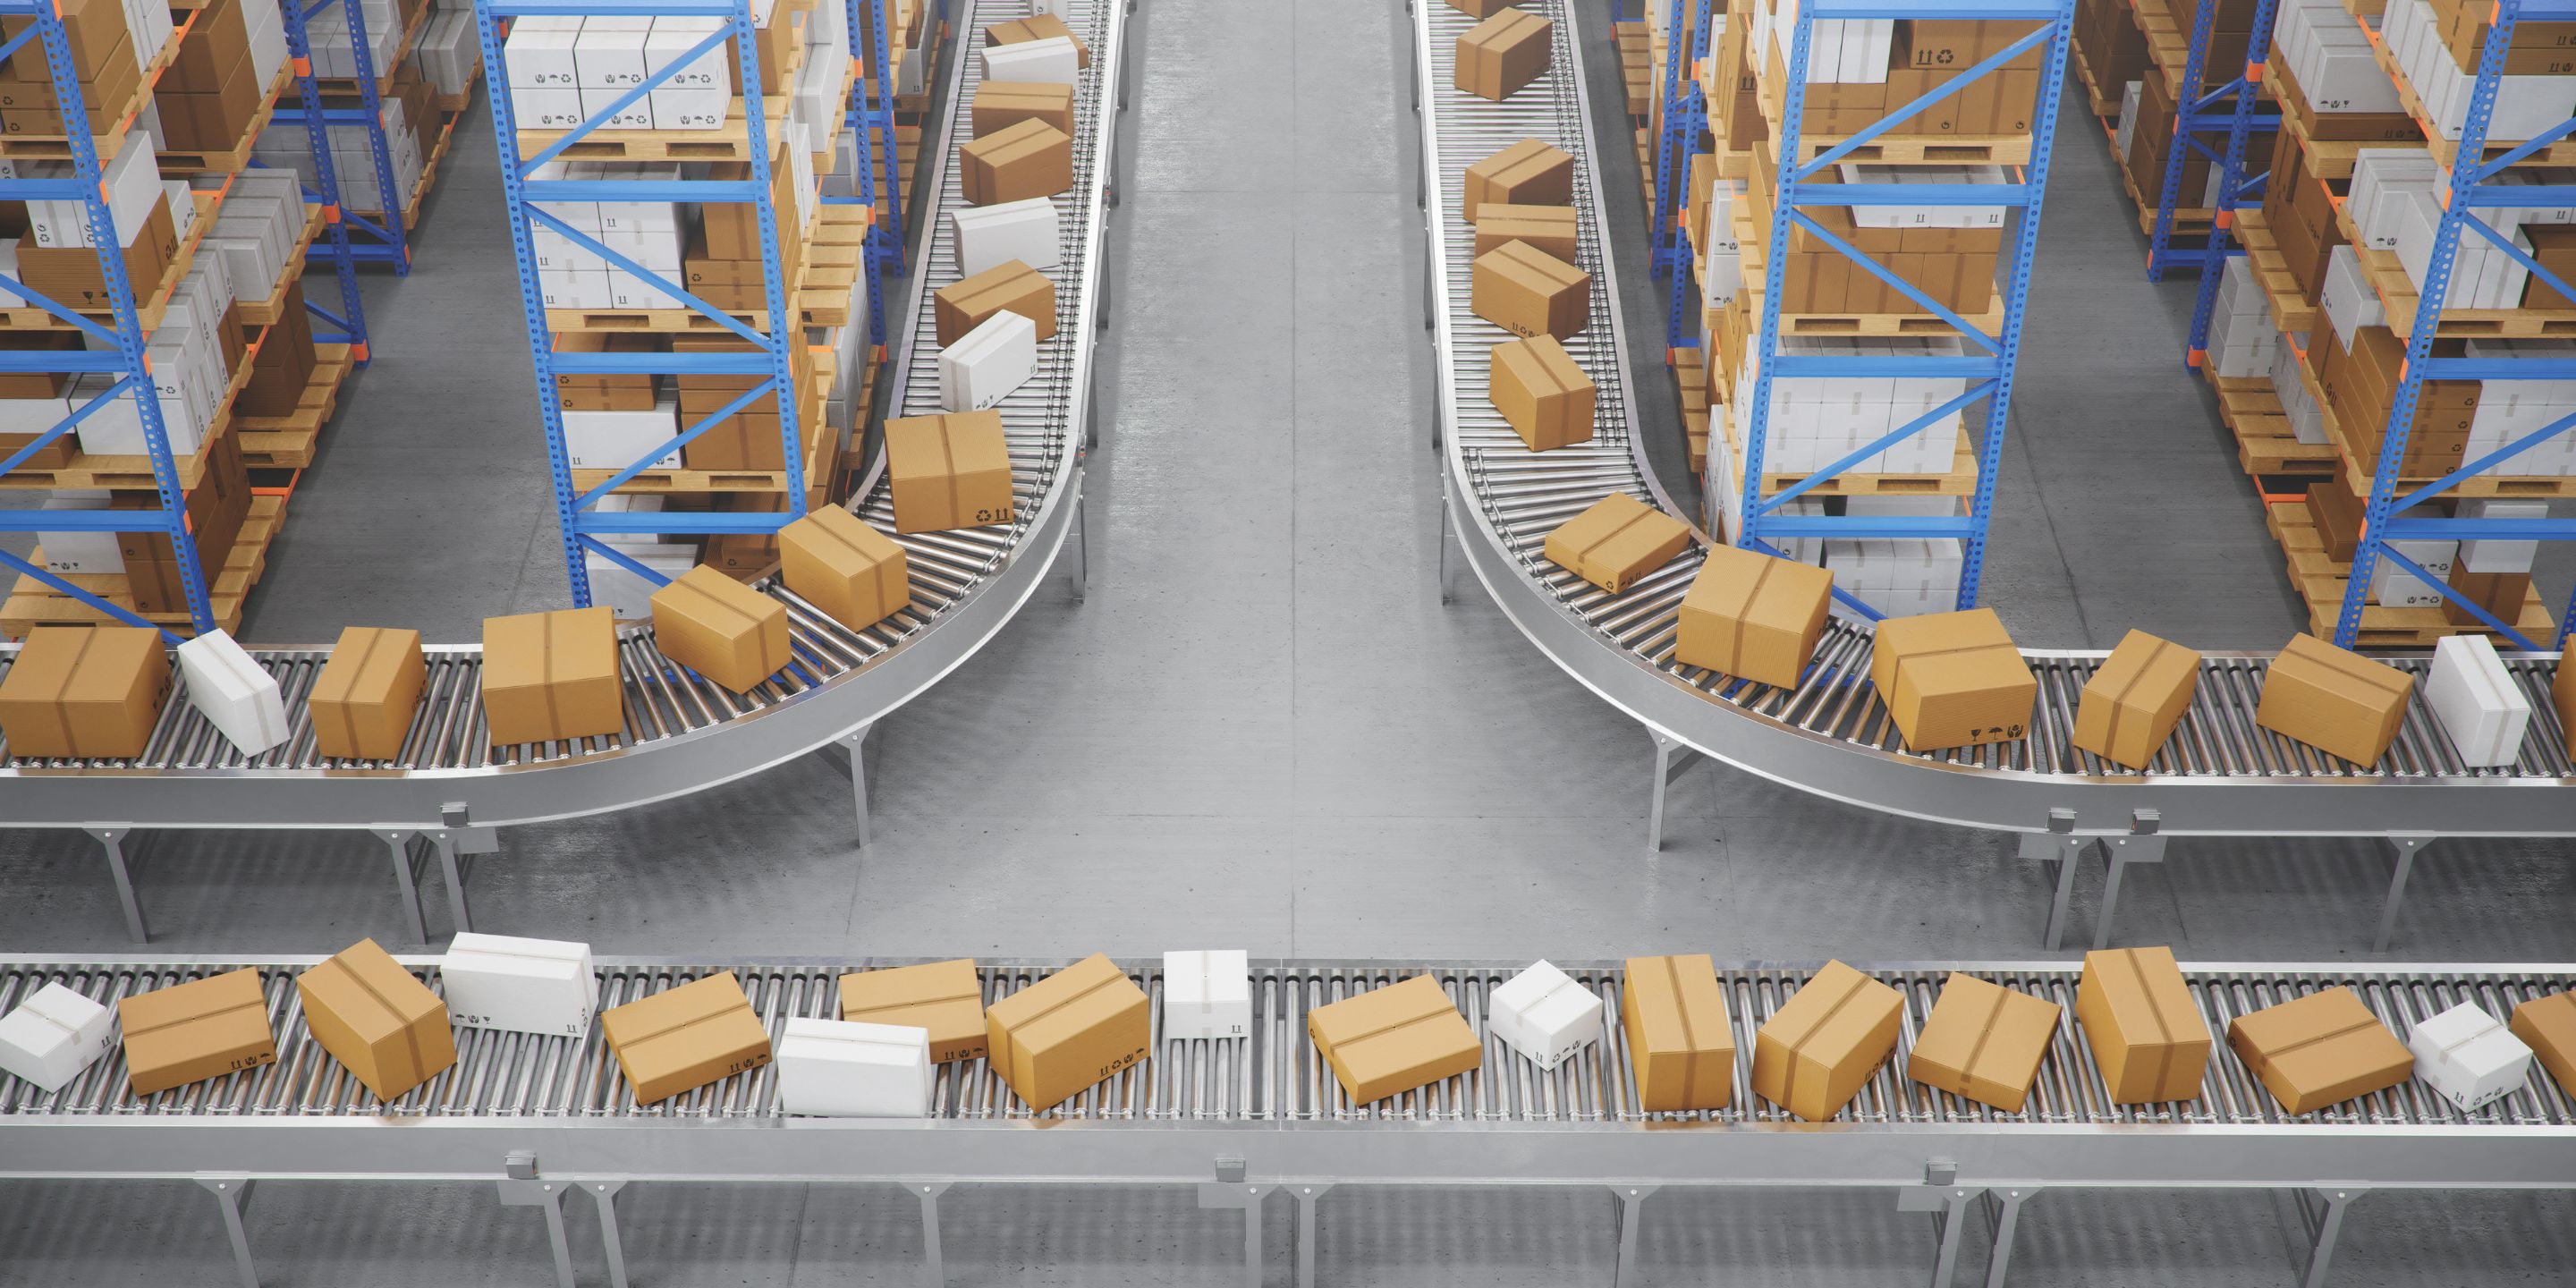 Boxes on conveyor belts in a warehouse.